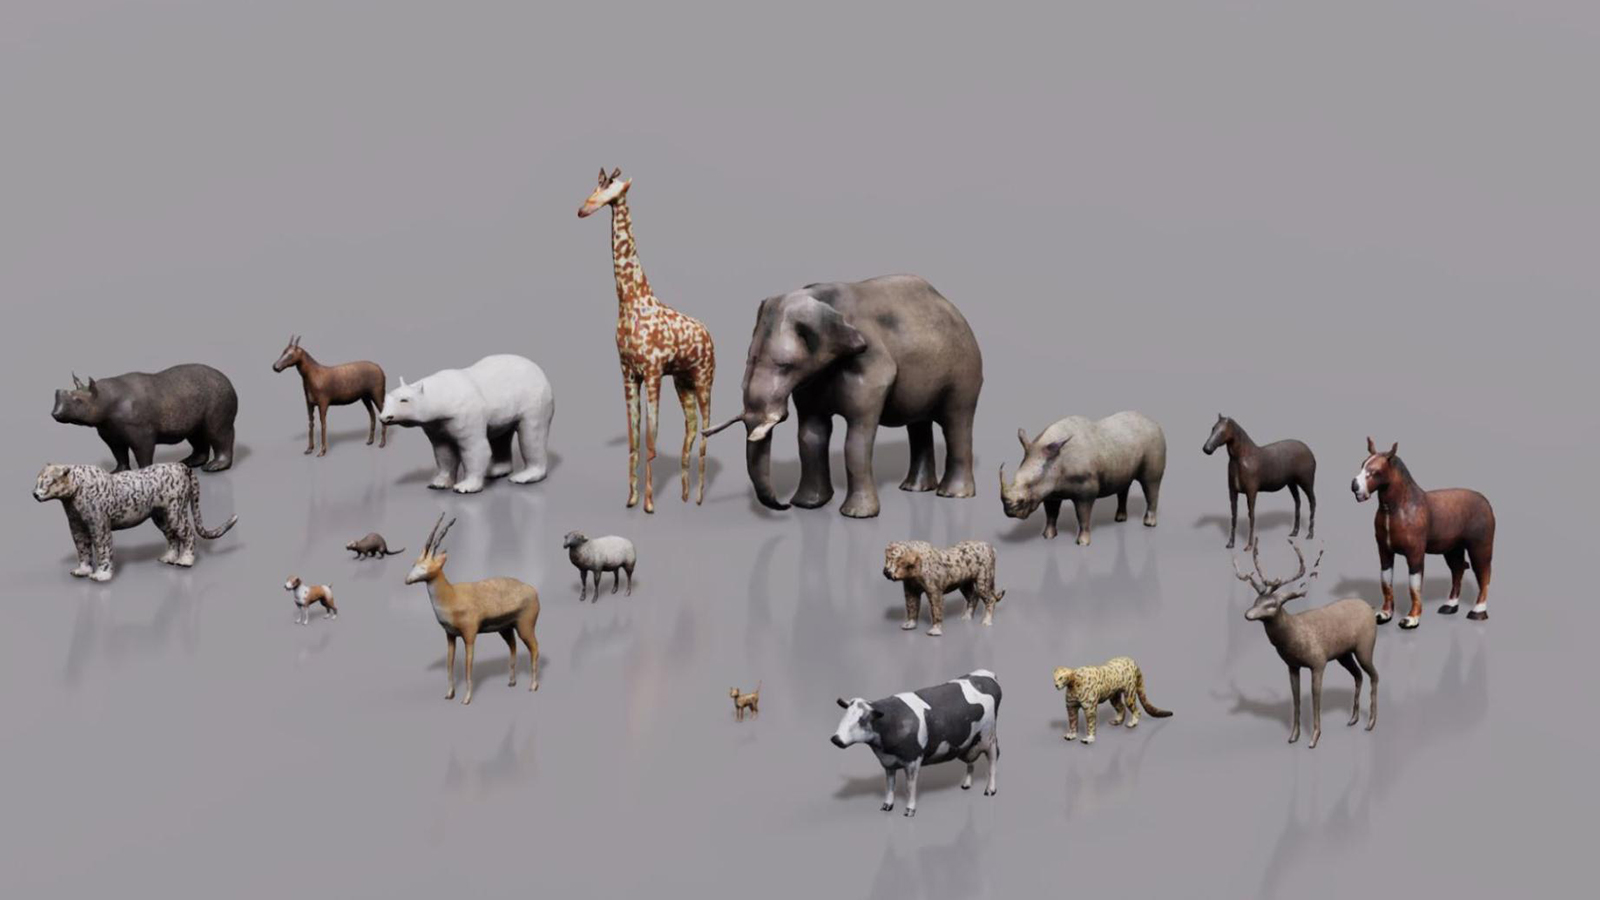 A group of different animals standing together.